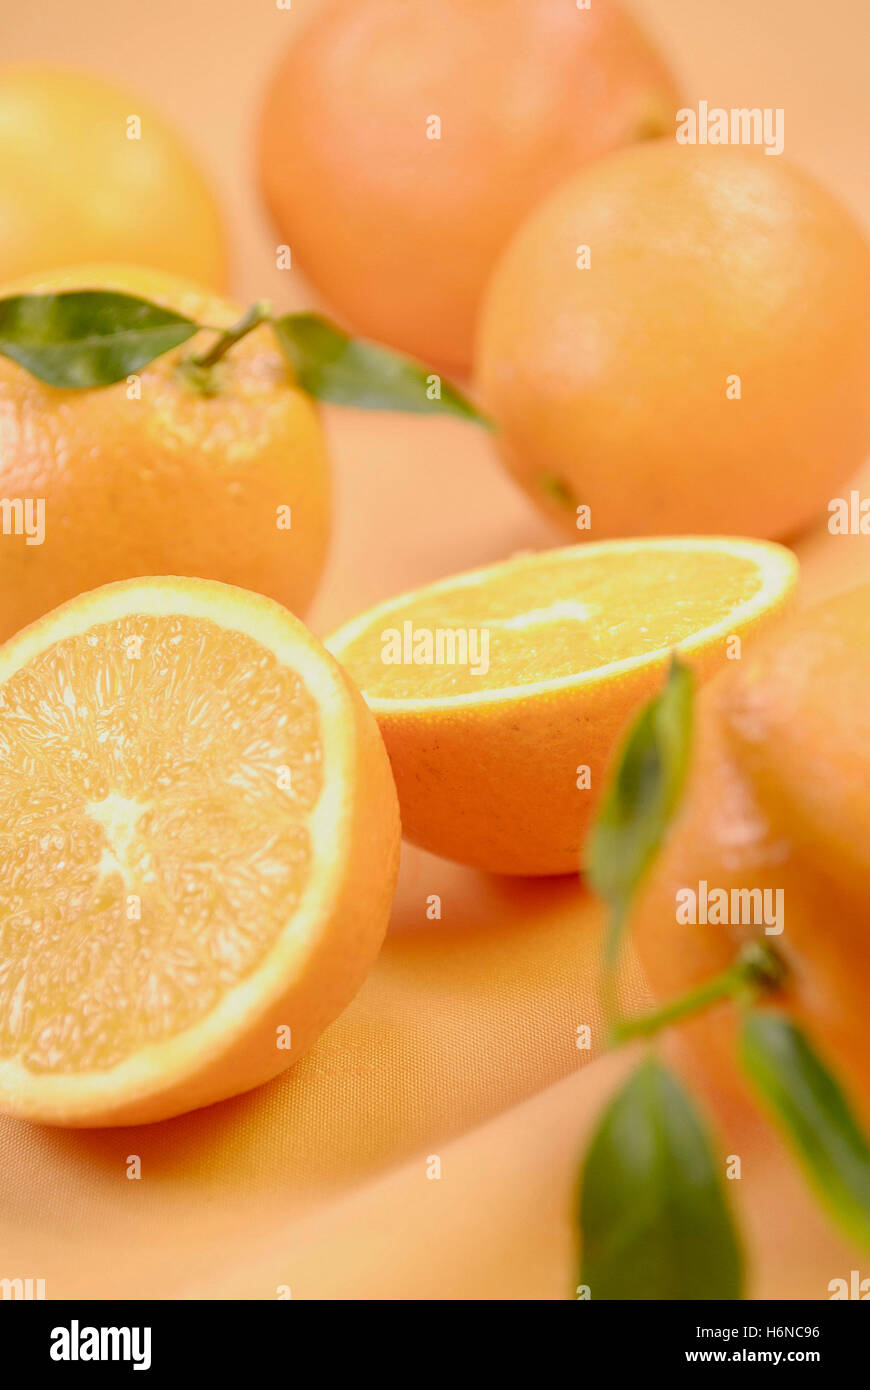 fruits vegetables Stock Photo